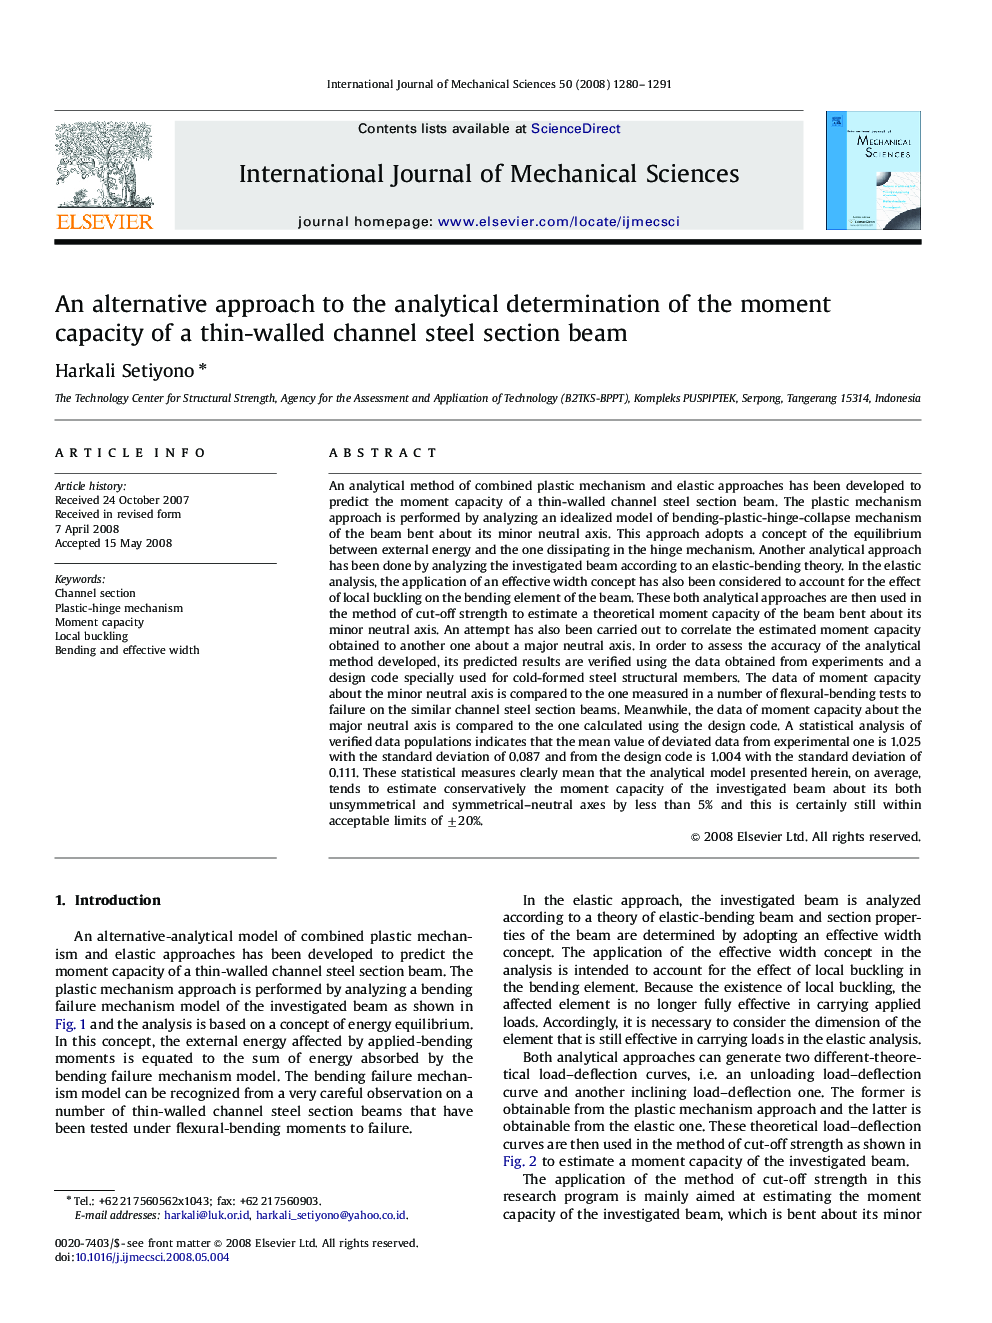 An alternative approach to the analytical determination of the moment capacity of a thin-walled channel steel section beam